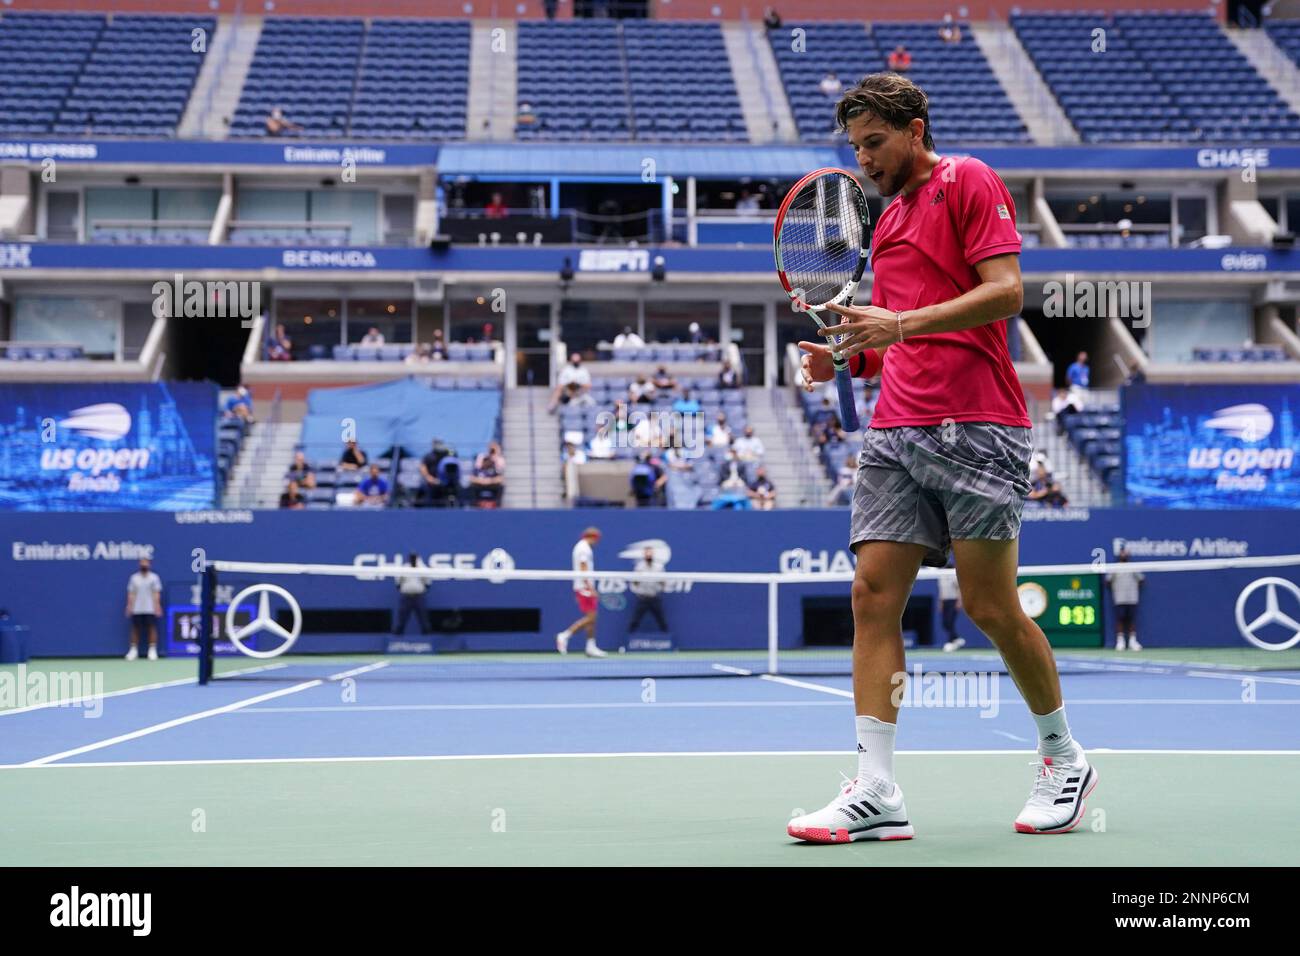 Dominic Thiem in action against Alexander Zverev during a mens singles final match at the 2020 US Open, Sunday, Sept